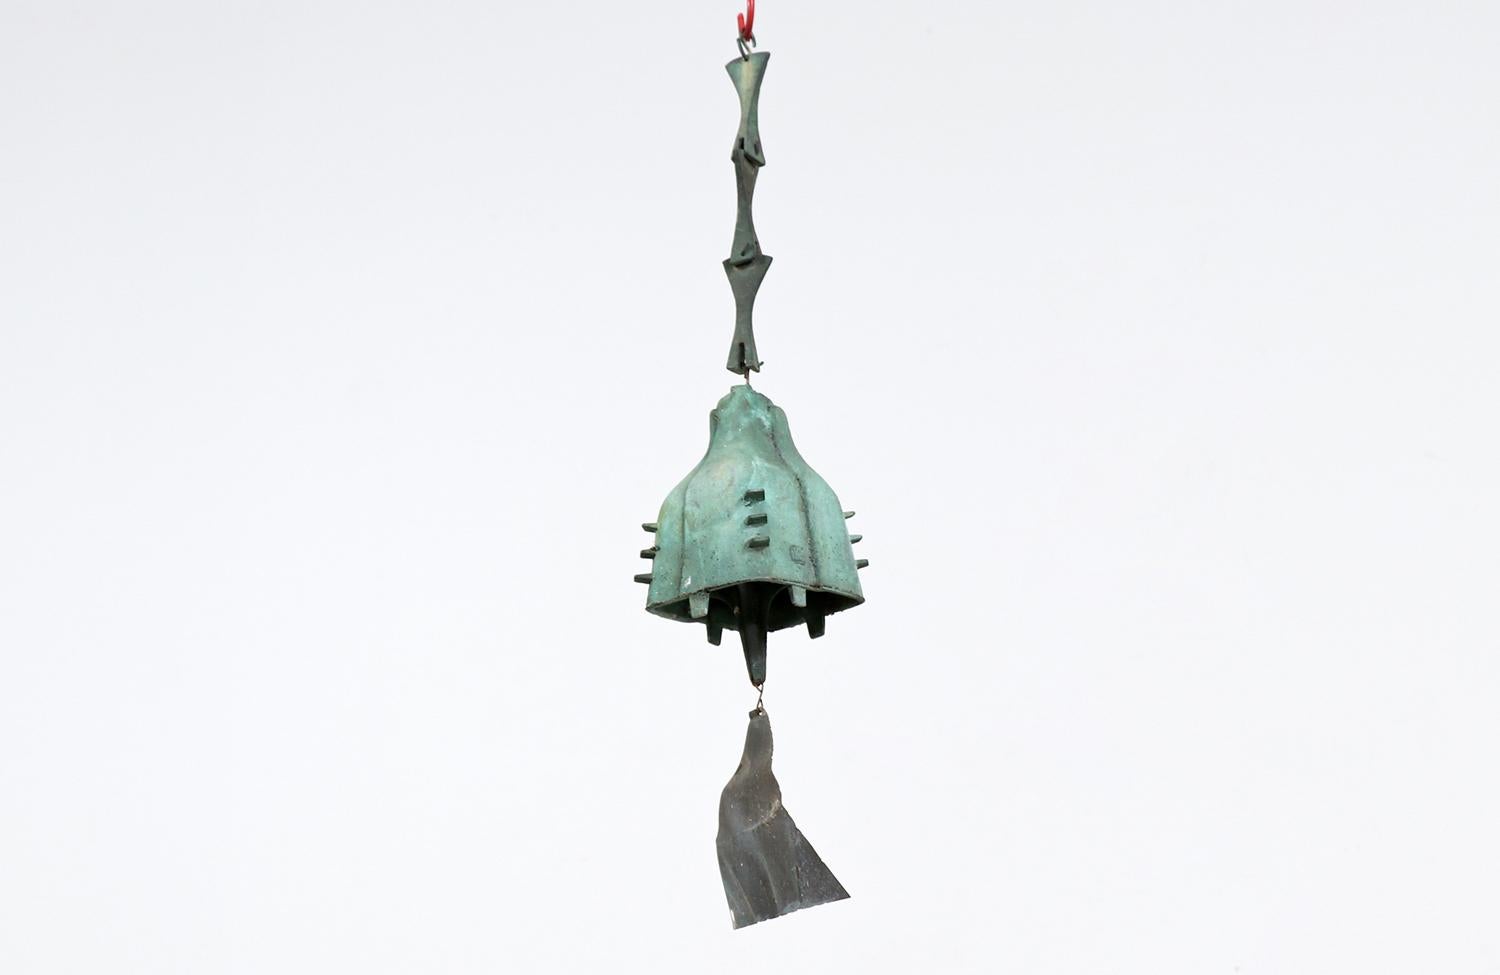 Vintage Paolo Soleri bronze wind Chime bell for Arcosanti.